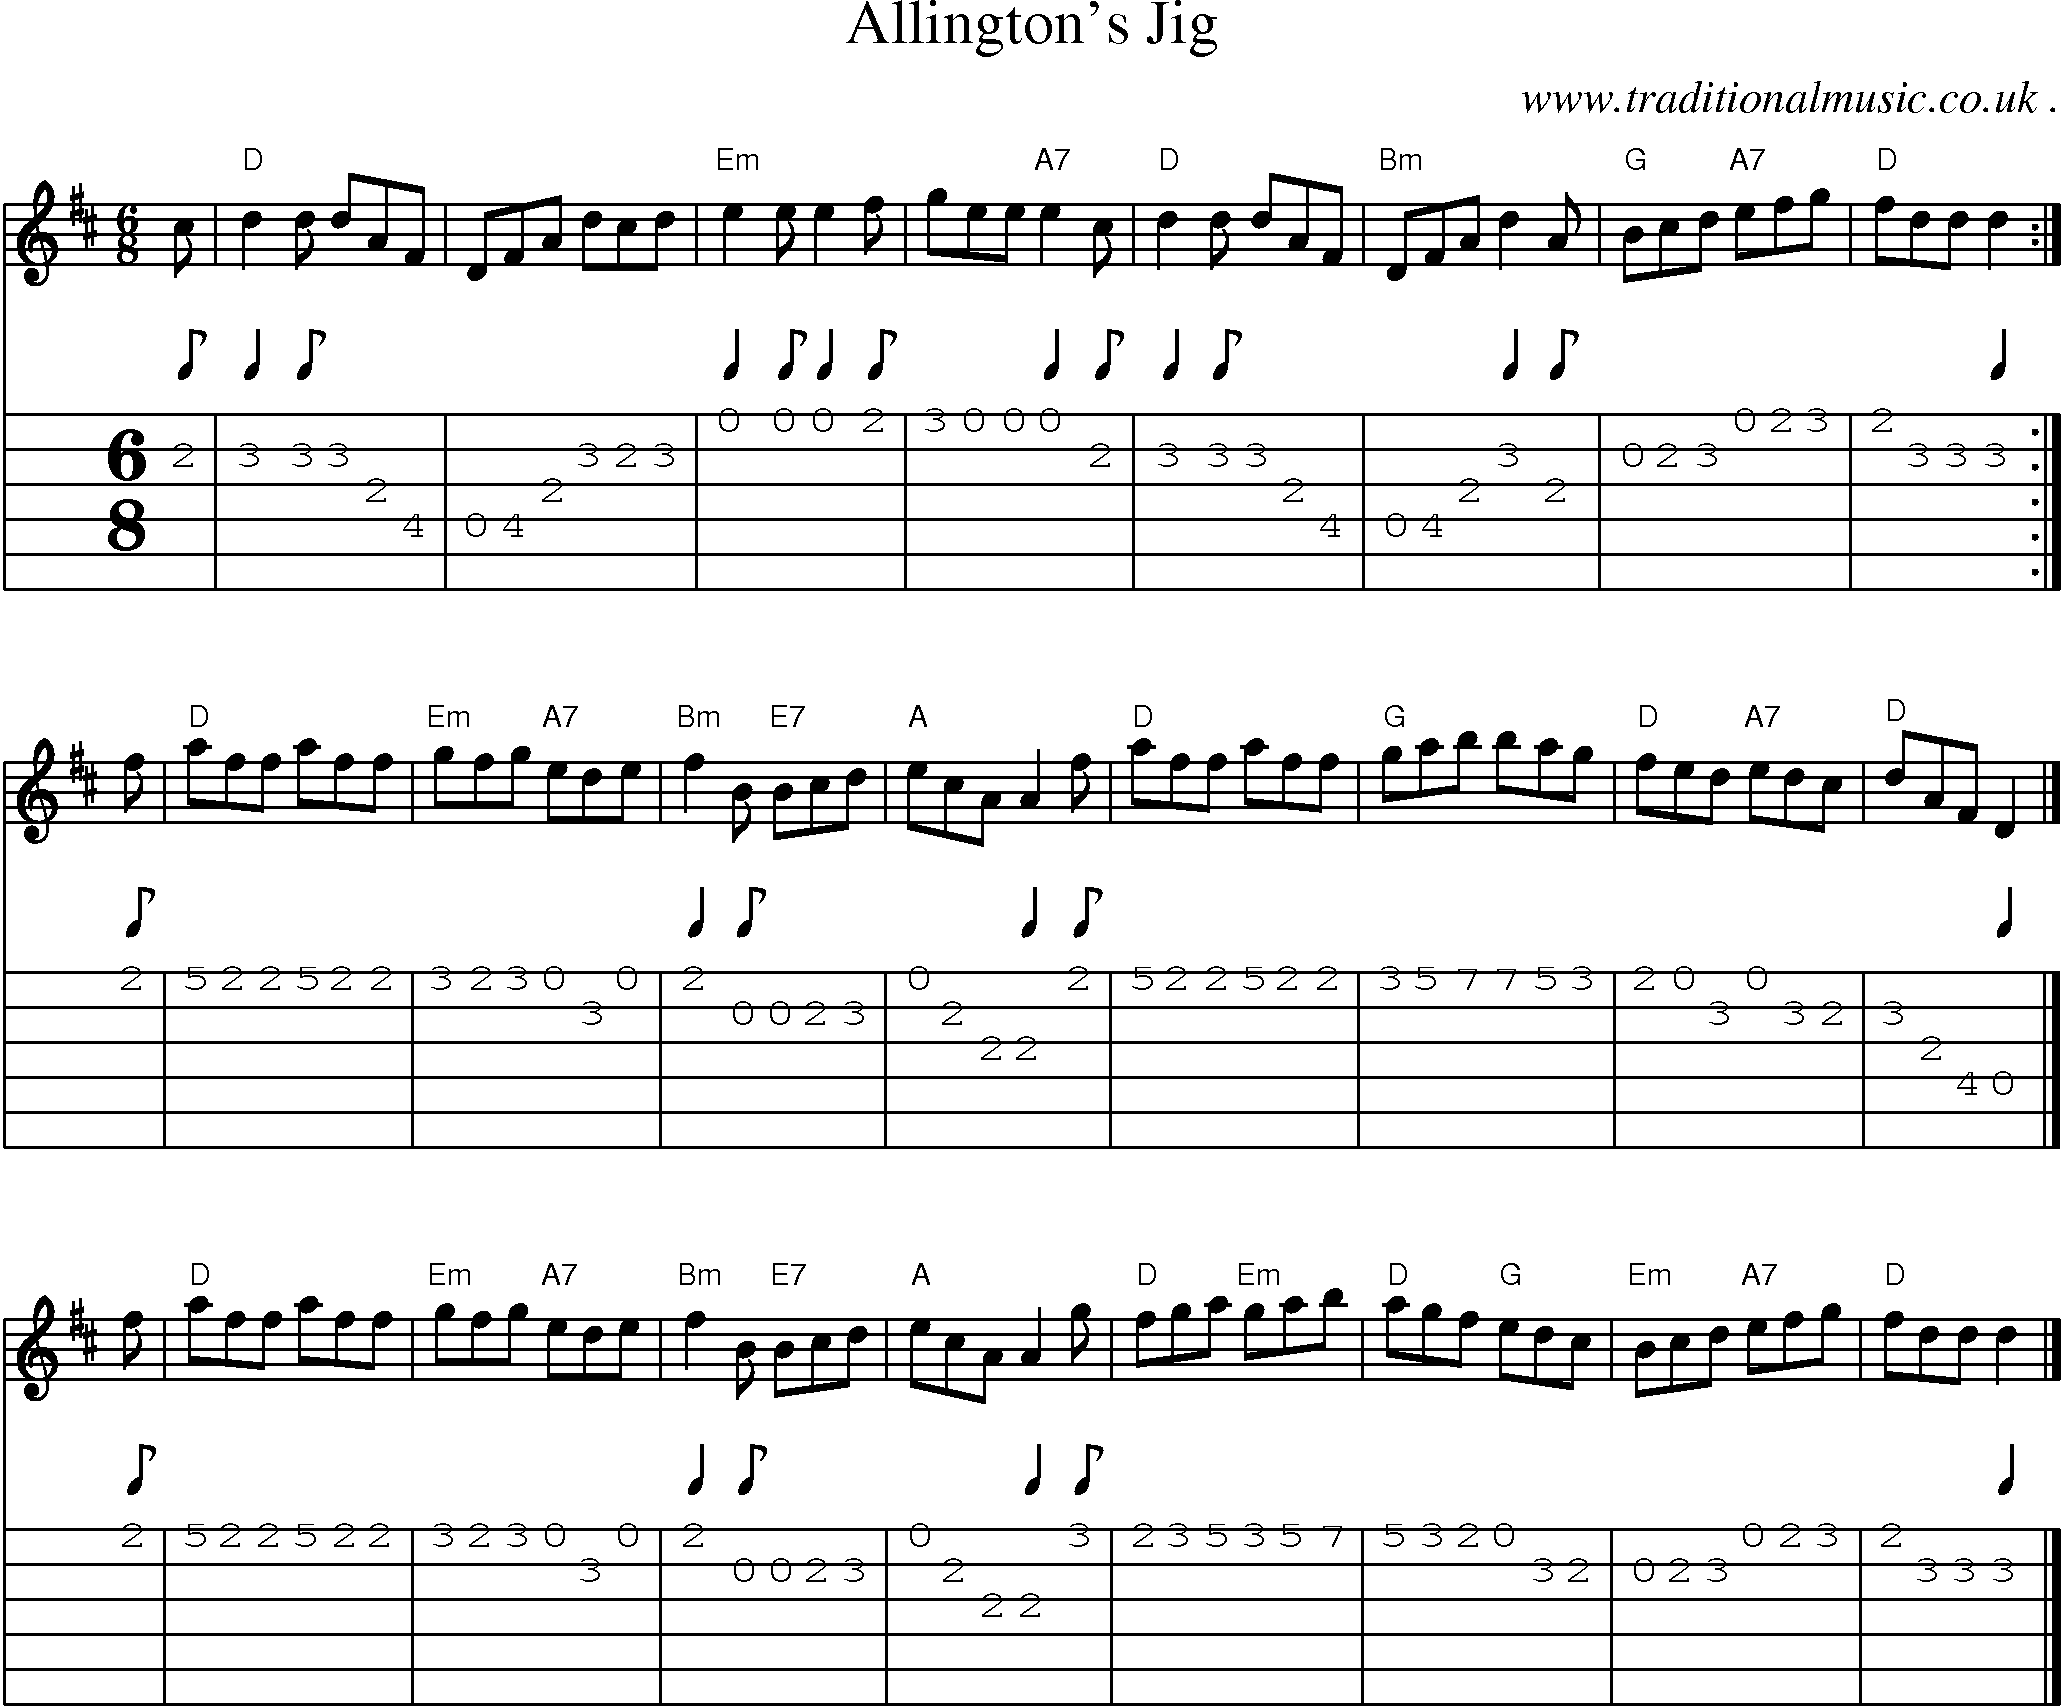 Sheet-music  score, Chords and Guitar Tabs for Allingtons Jig